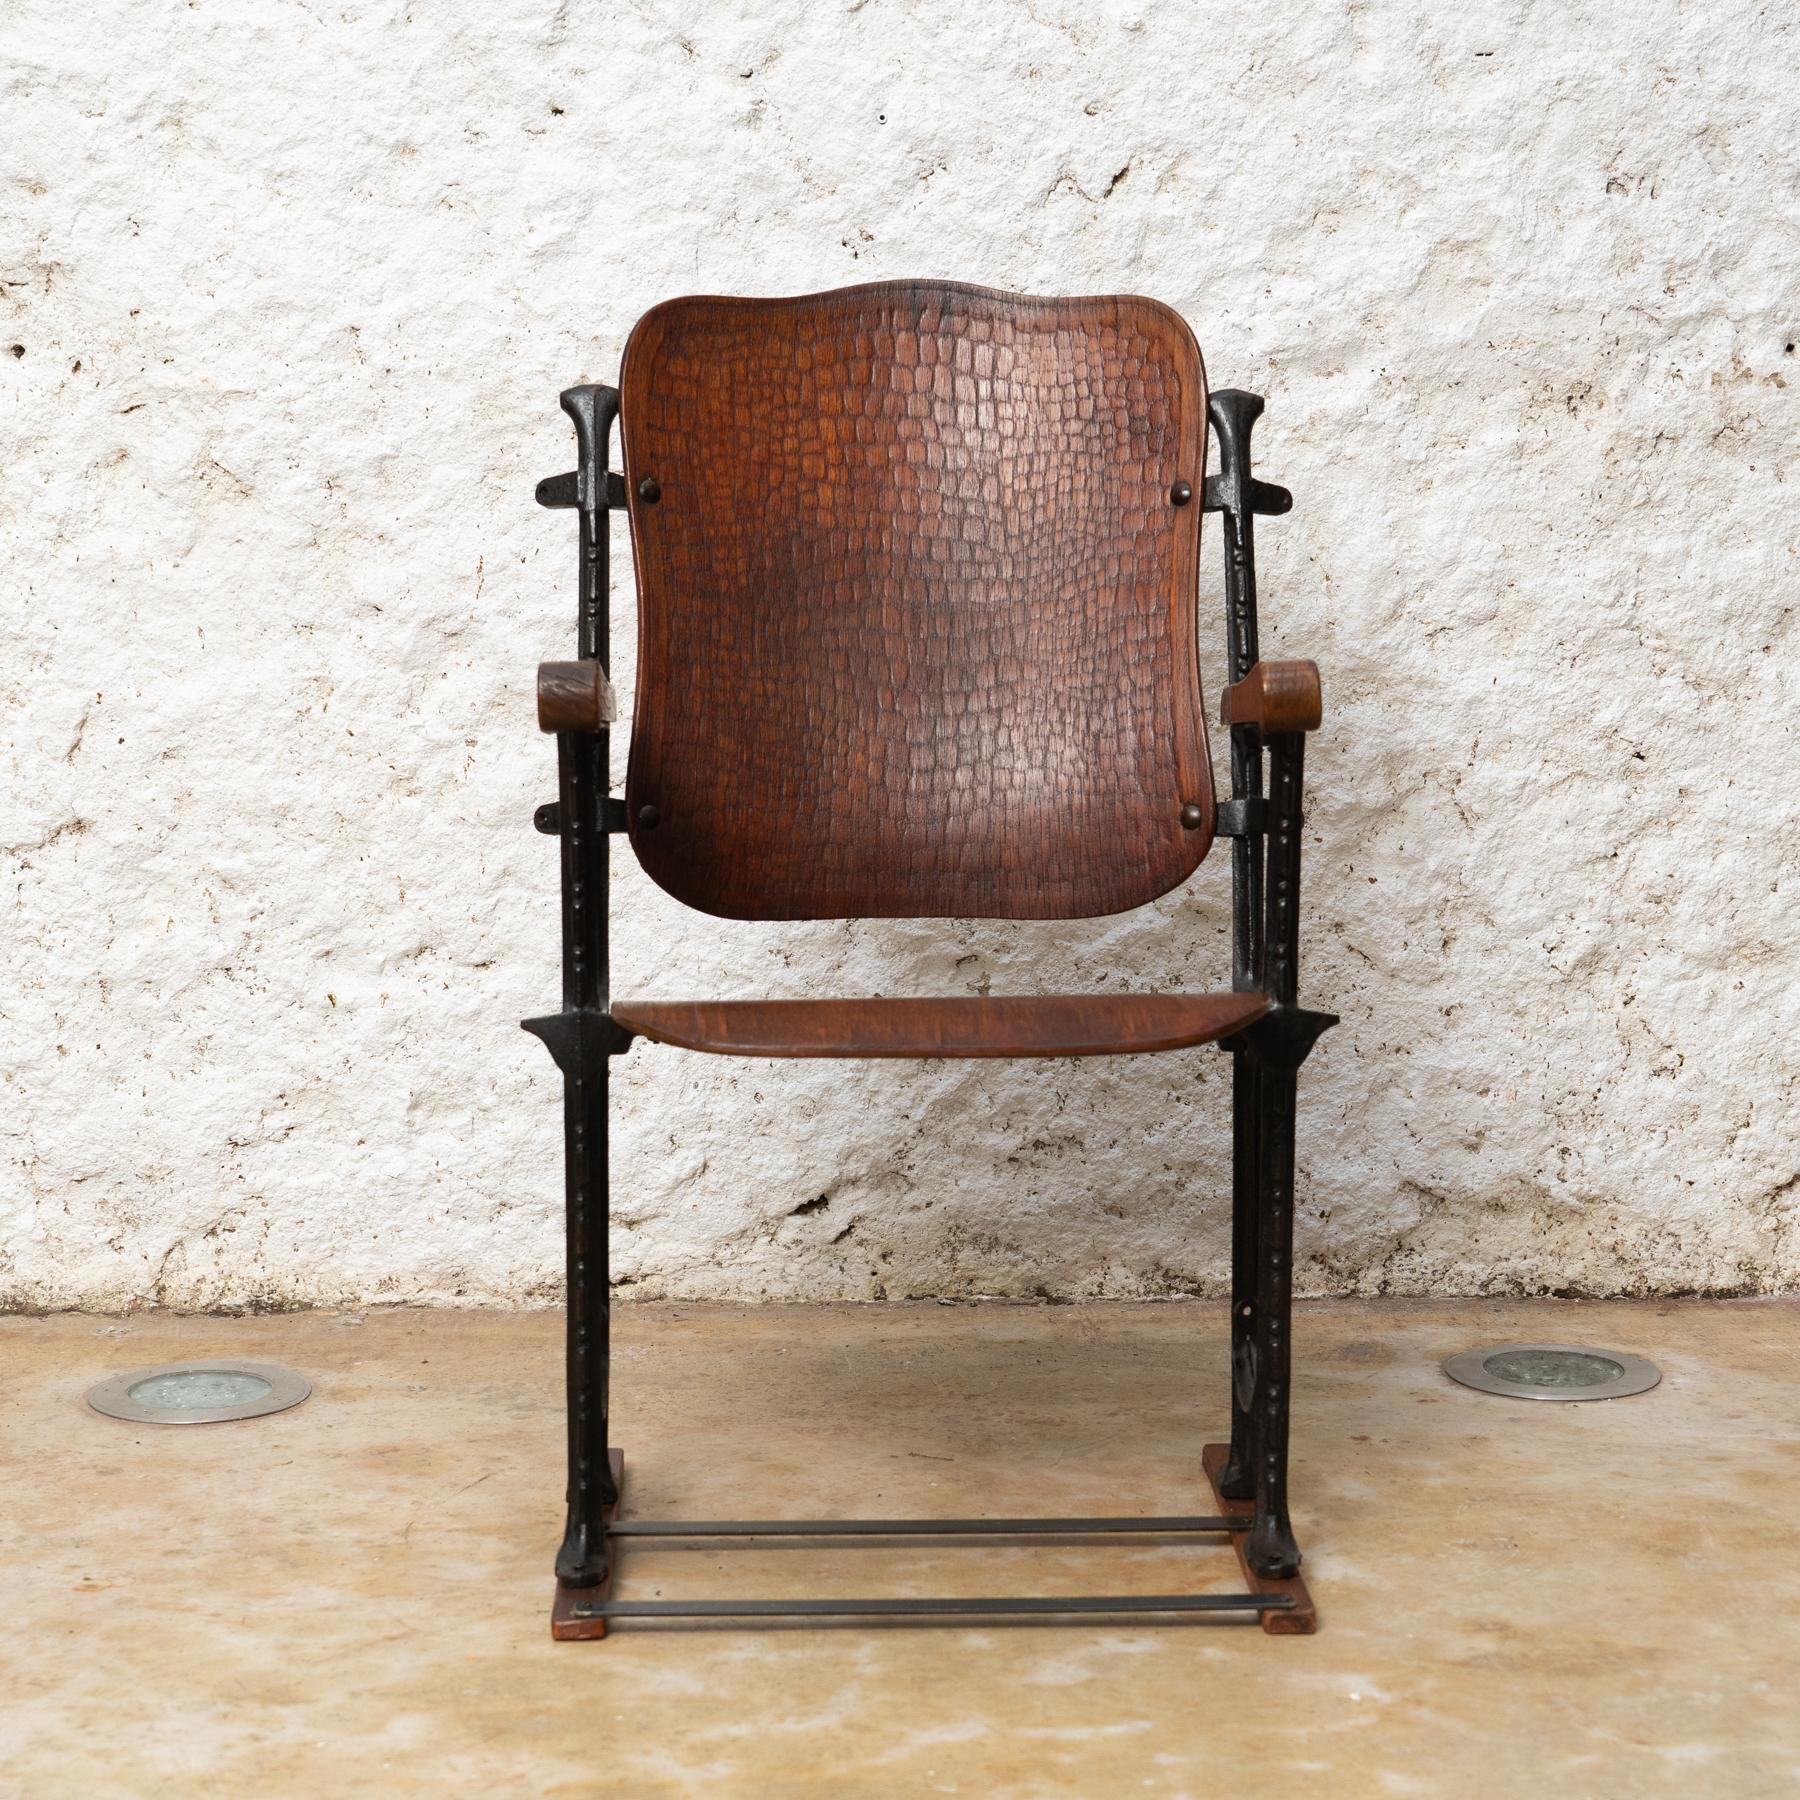 Elegance in Time: Catalan Modernism Theater Chair 'Kursaal', c. 1930 For Sale 2